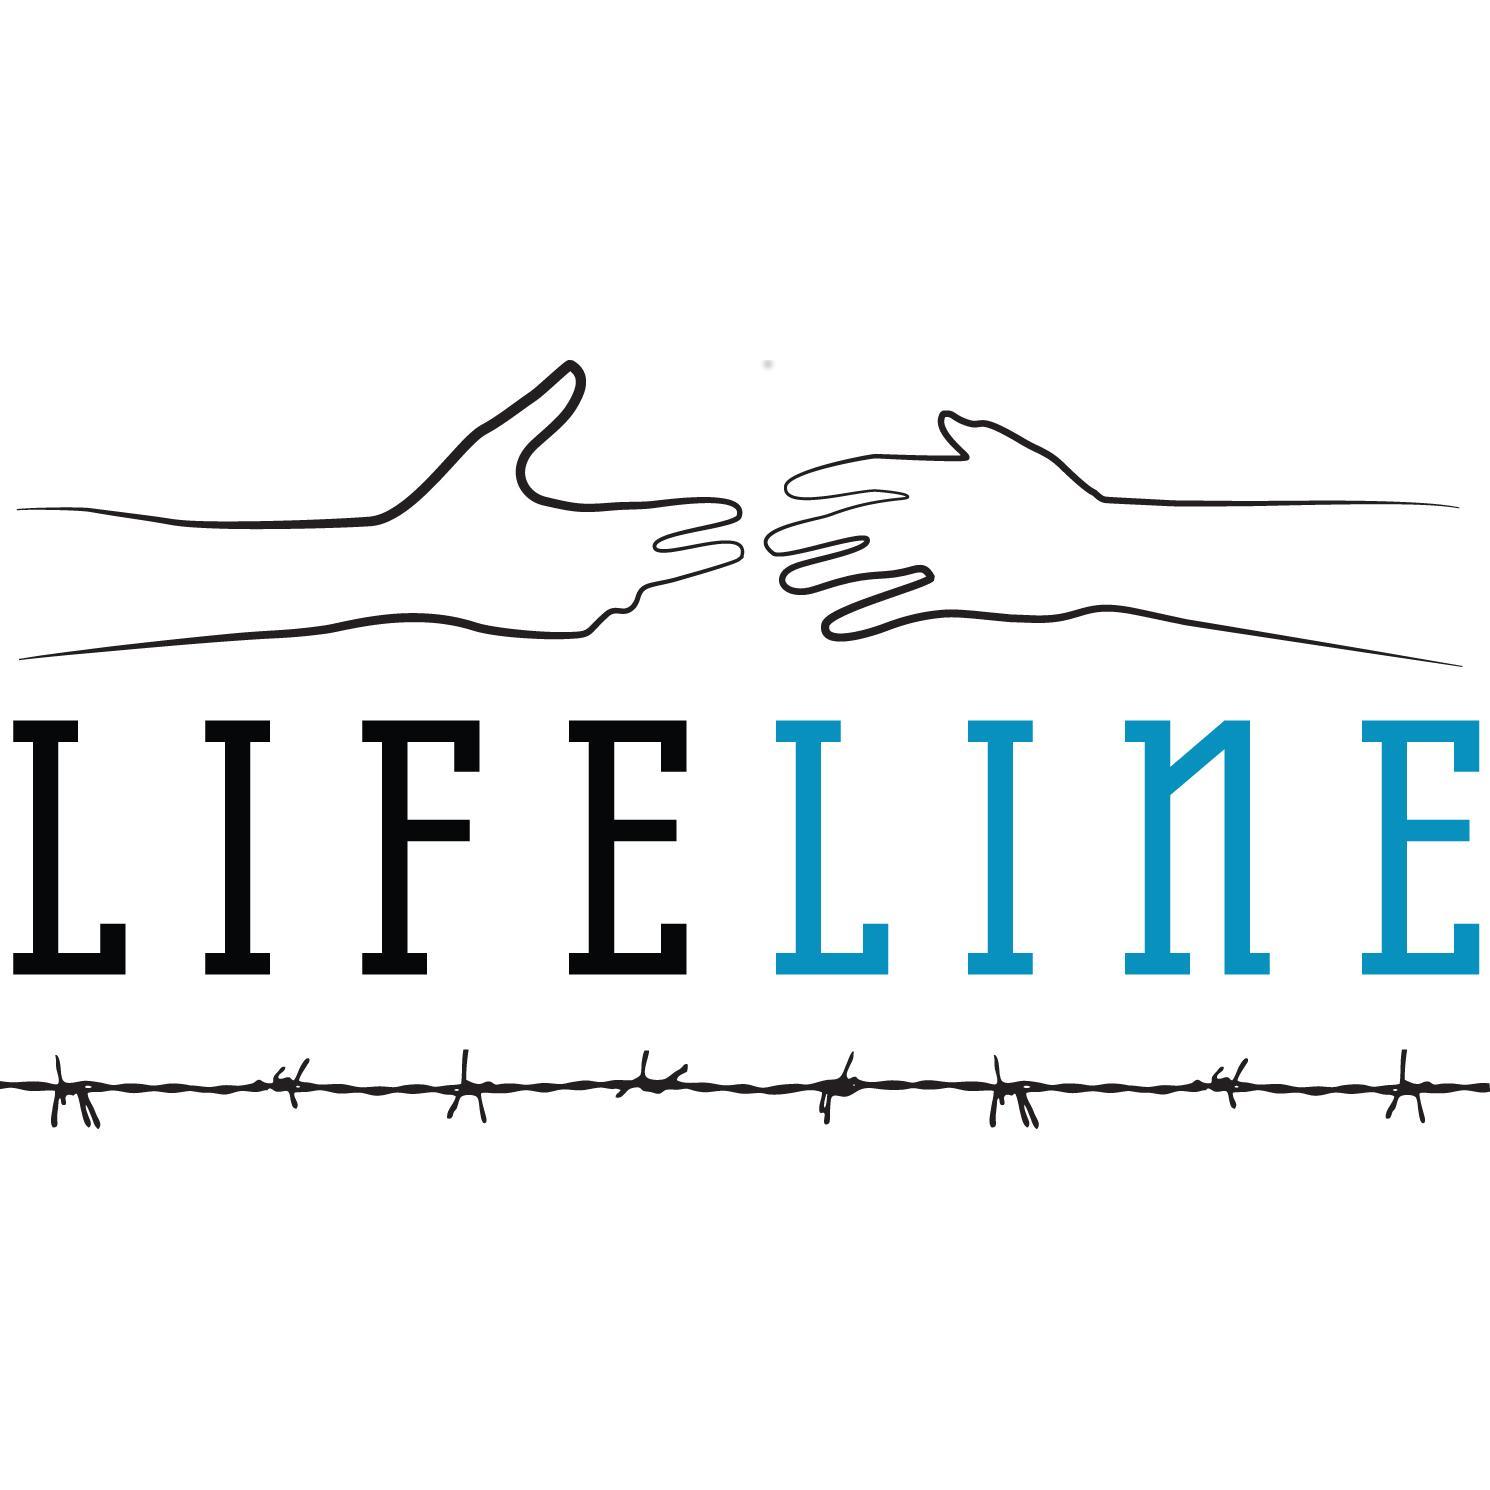 Led by Freedom House, the Lifeline consortium provides emergency assistance + rapid response grants to at-risk CSOs. Tweets do not represent views of members.